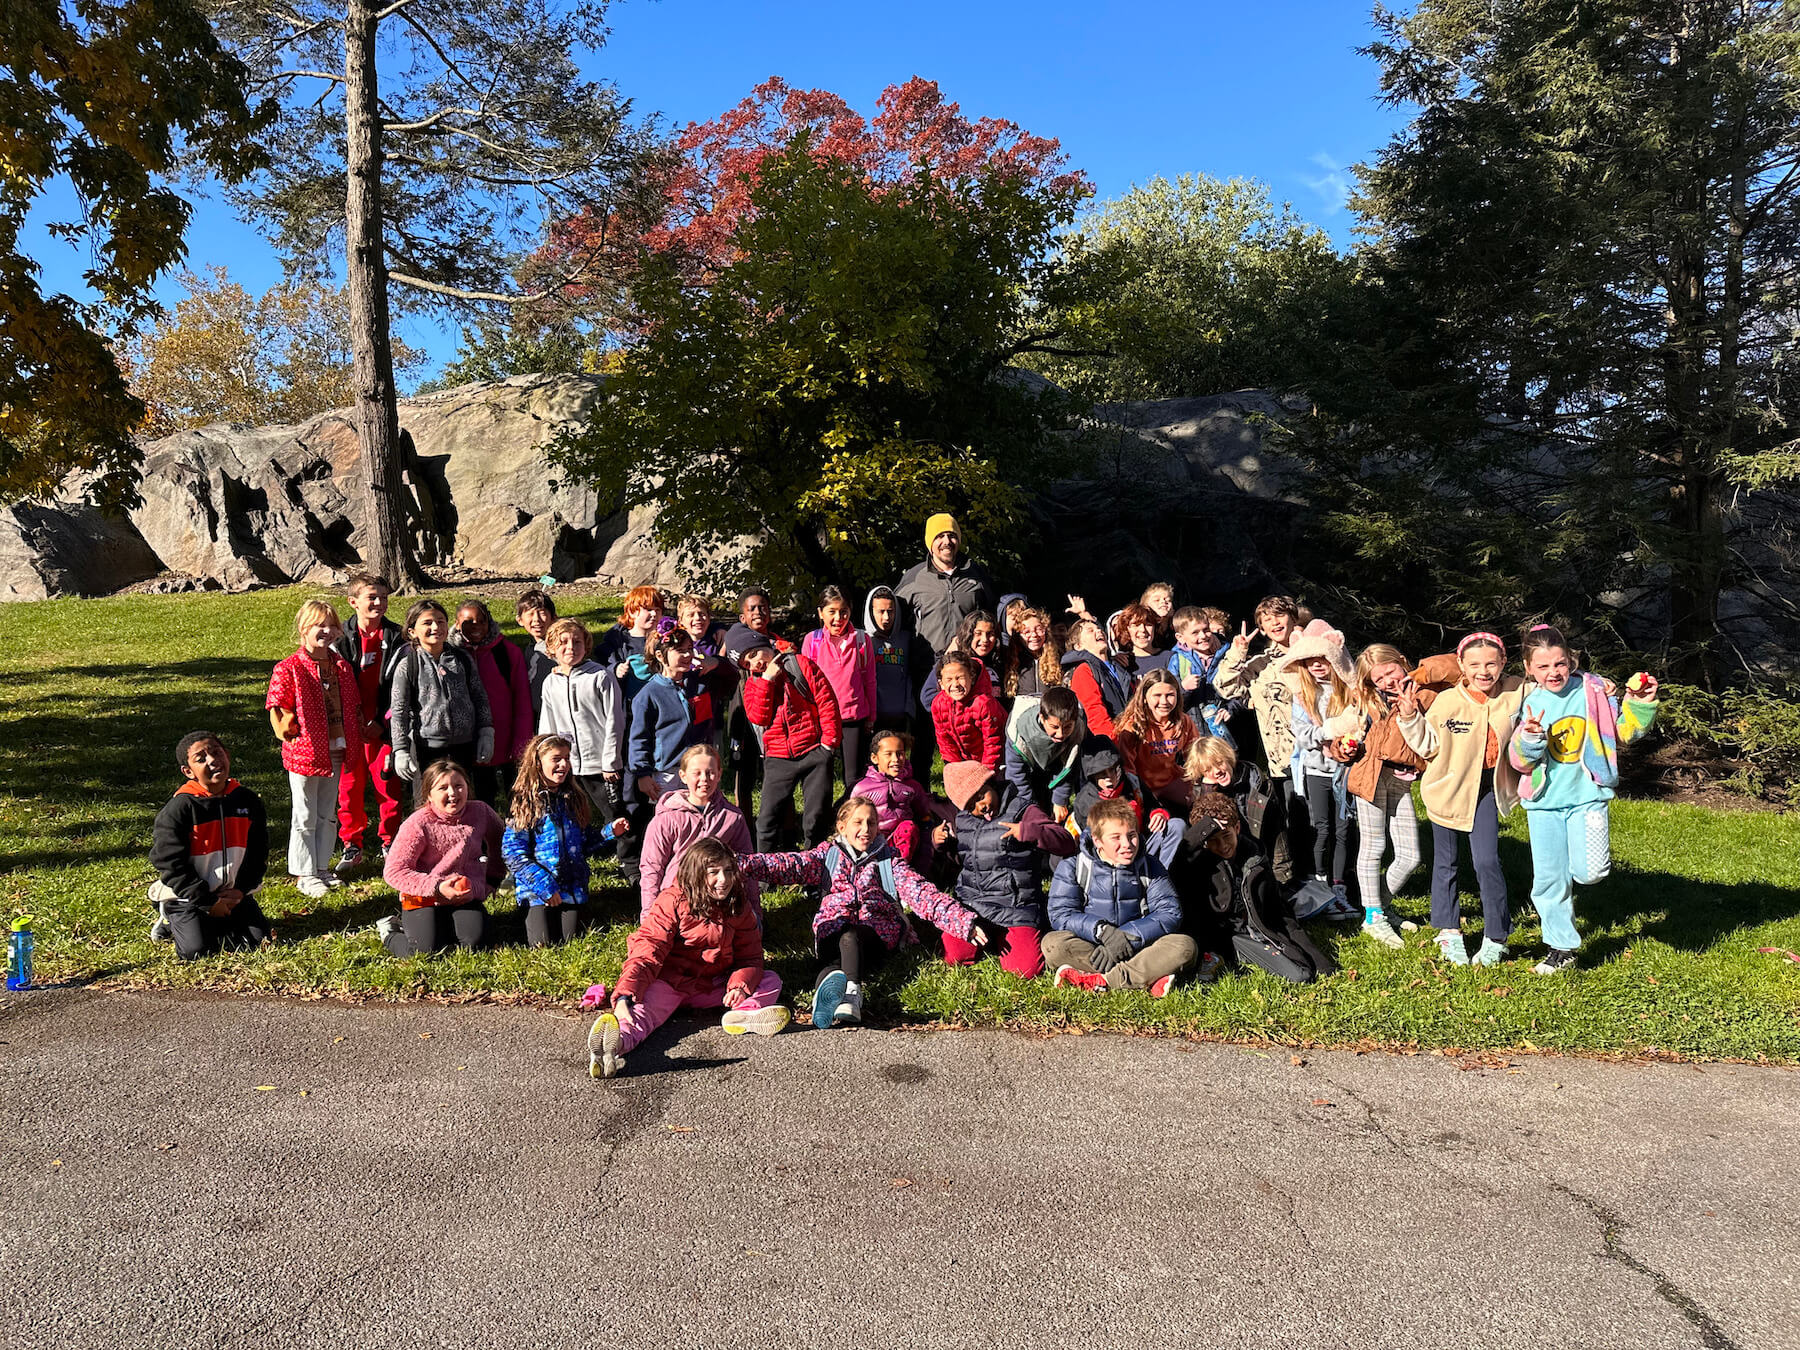 Ethical Culture Fieldston School_Feel Good Photos_Fieldston Lower 3rd Grade class poses for class photo during a field trip to NYBG